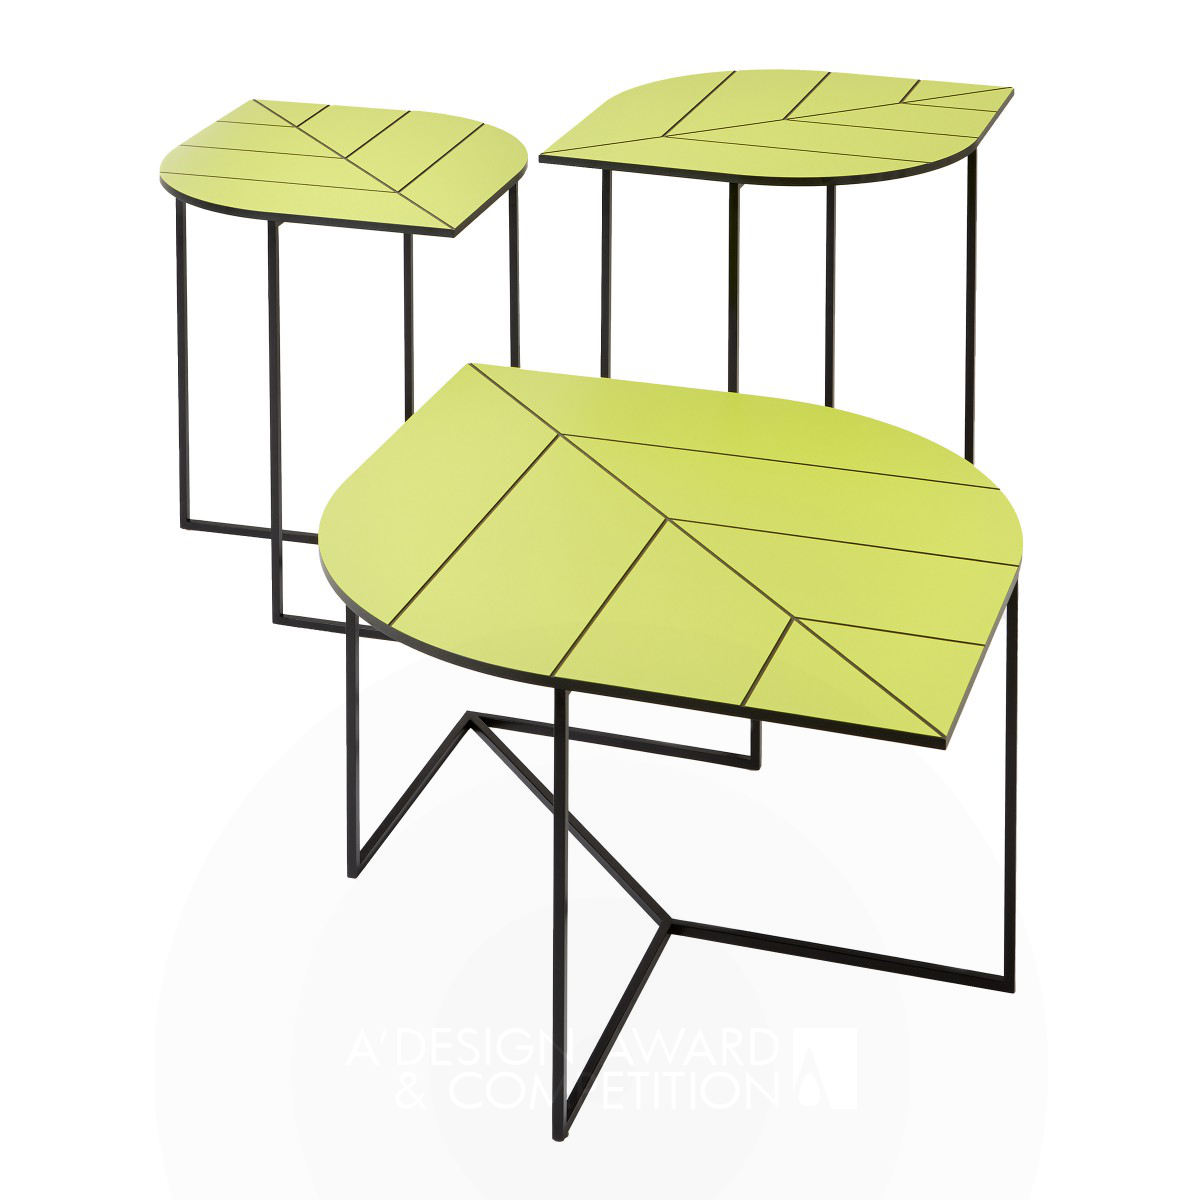 Leaf low table by Martin Smid